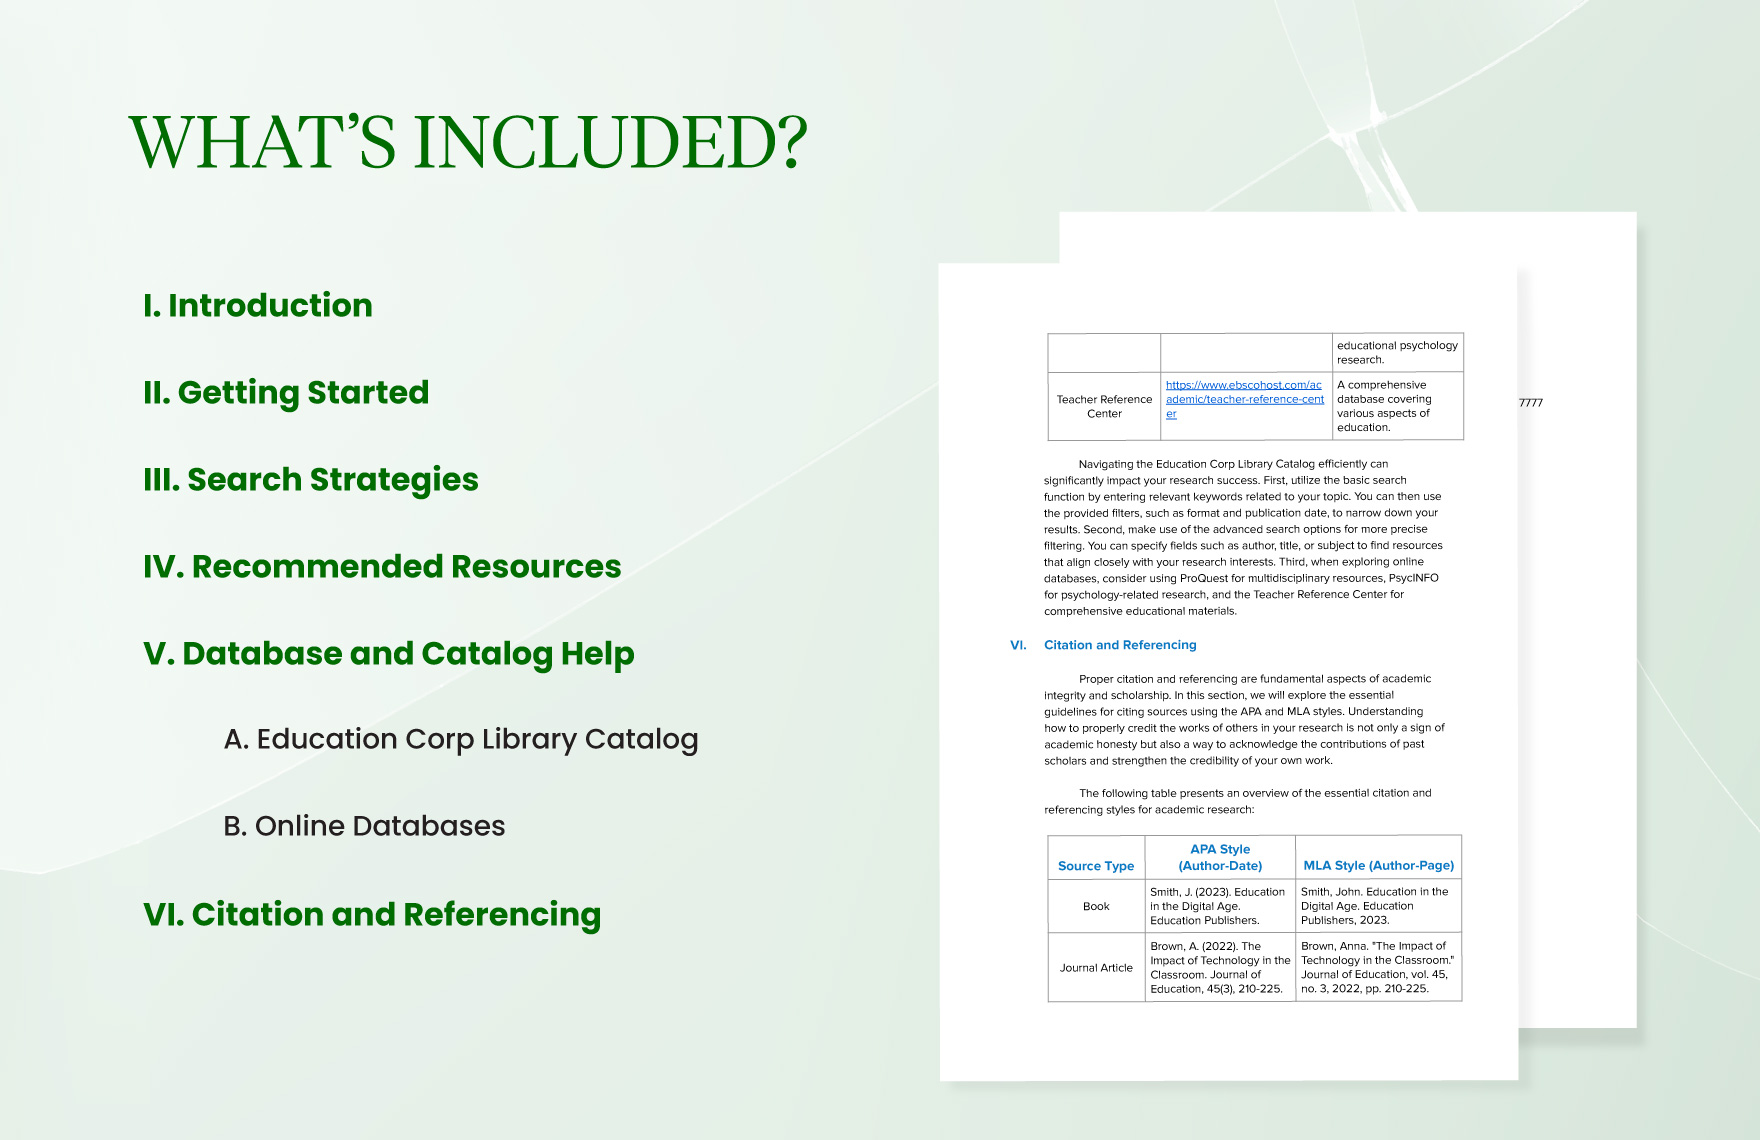 School Library Research Guides Template